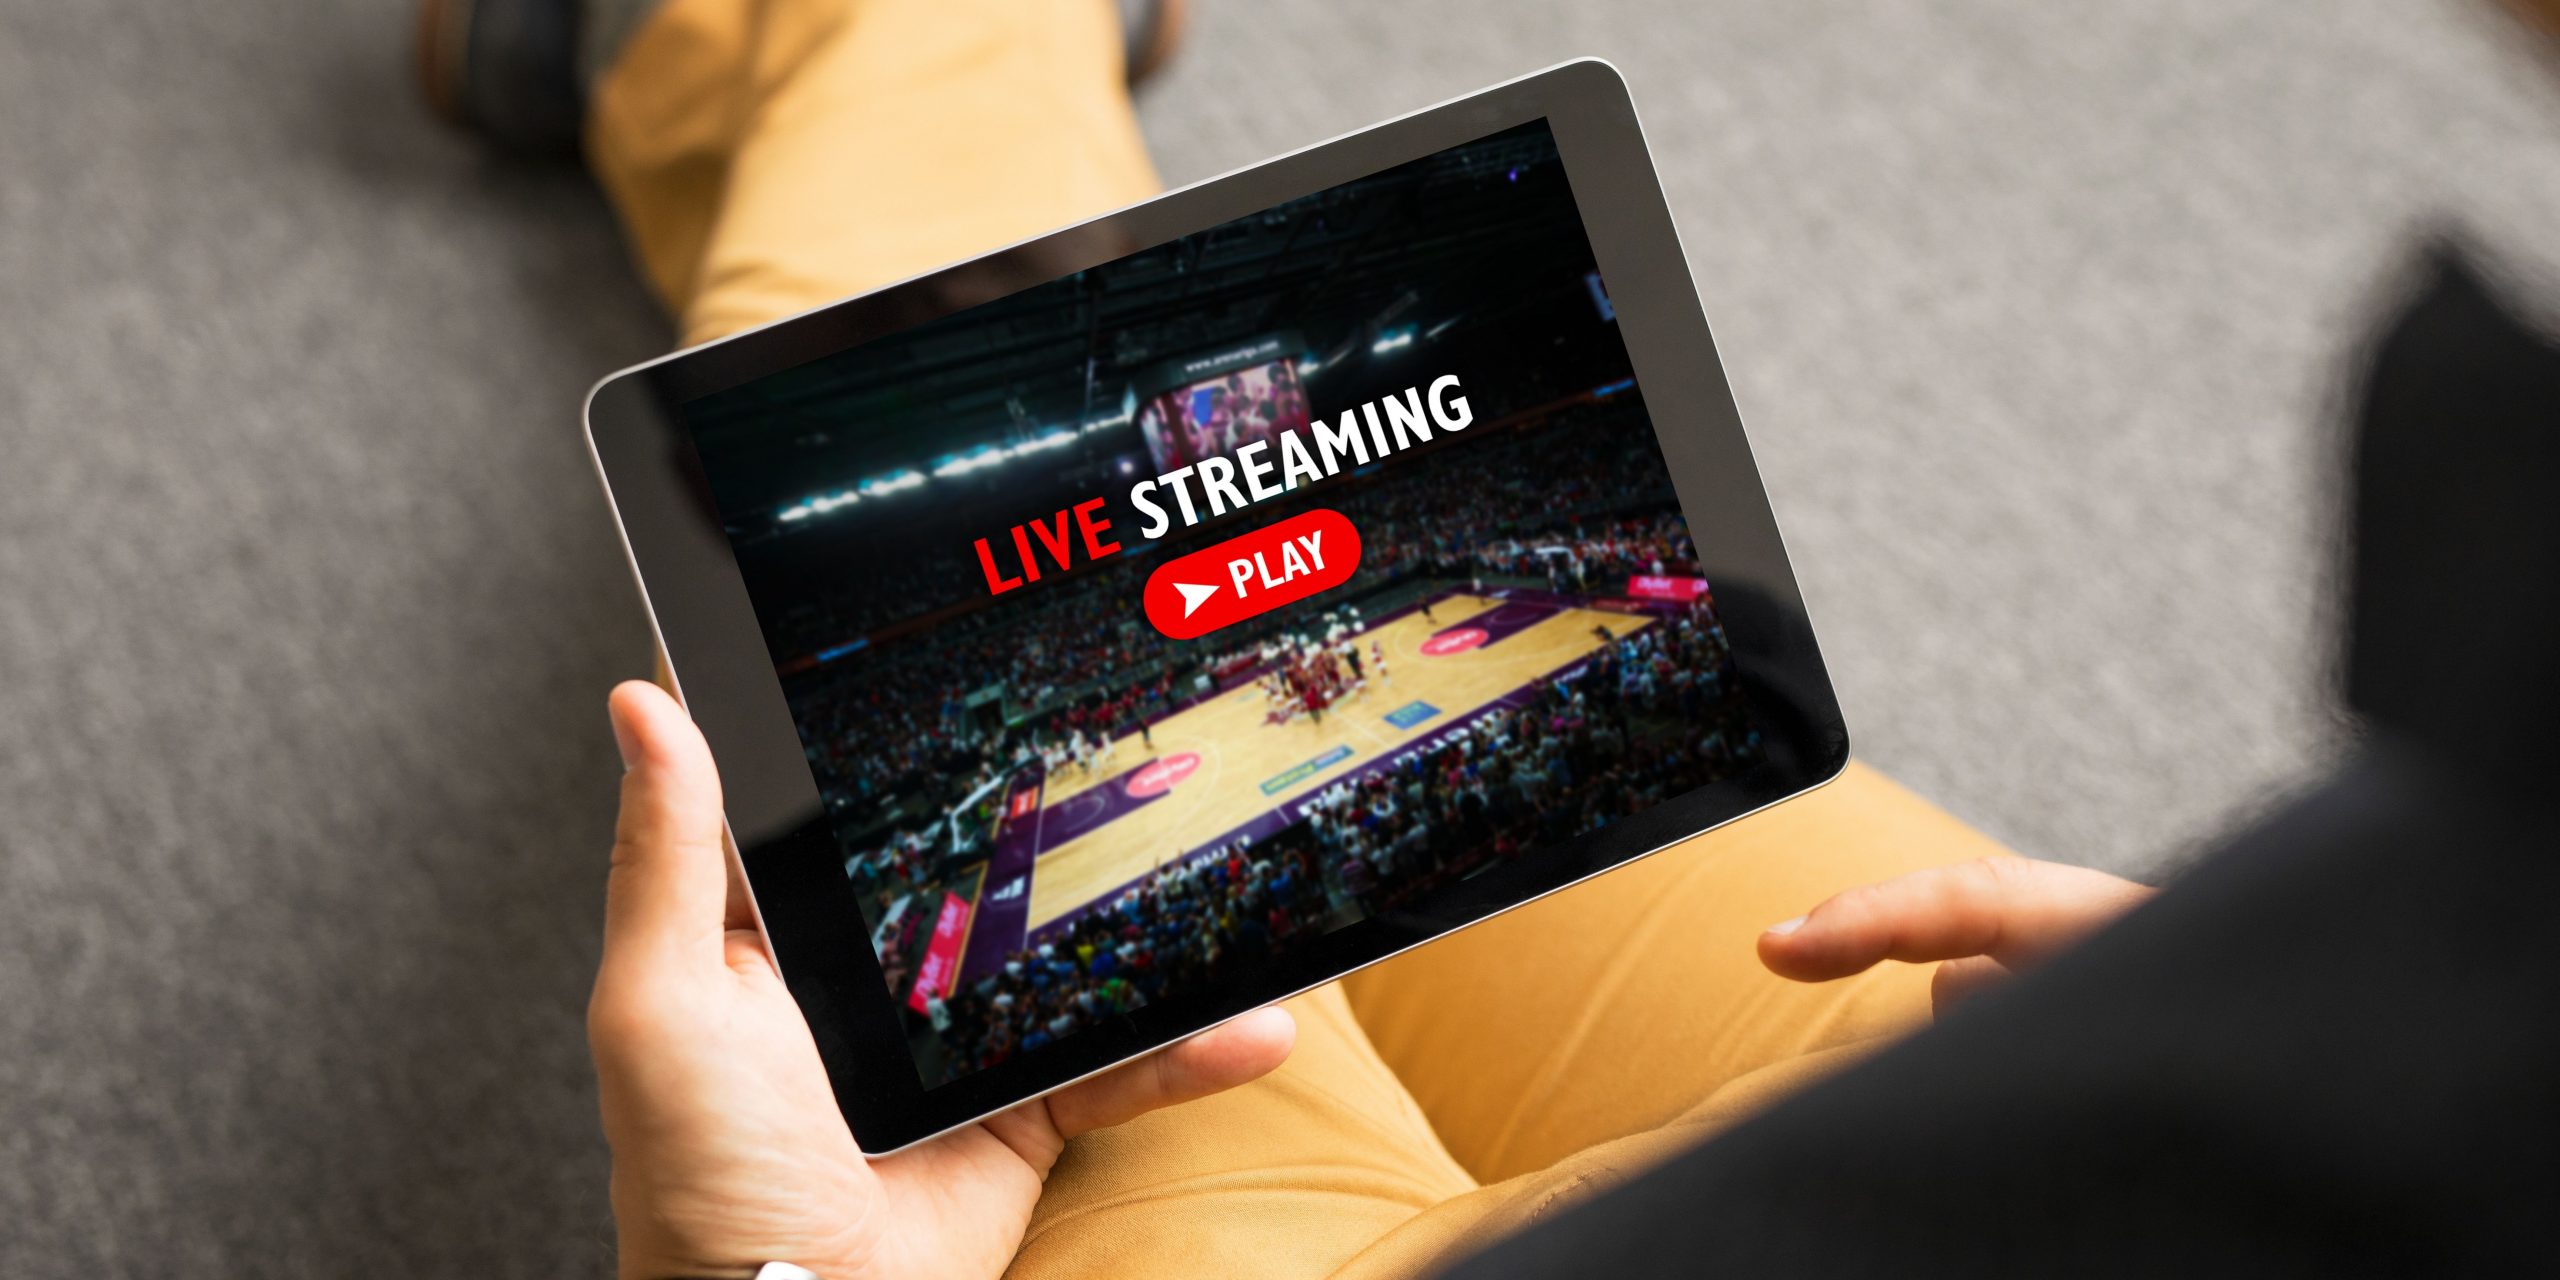 What Are Live Streaming Services and How Do They Work